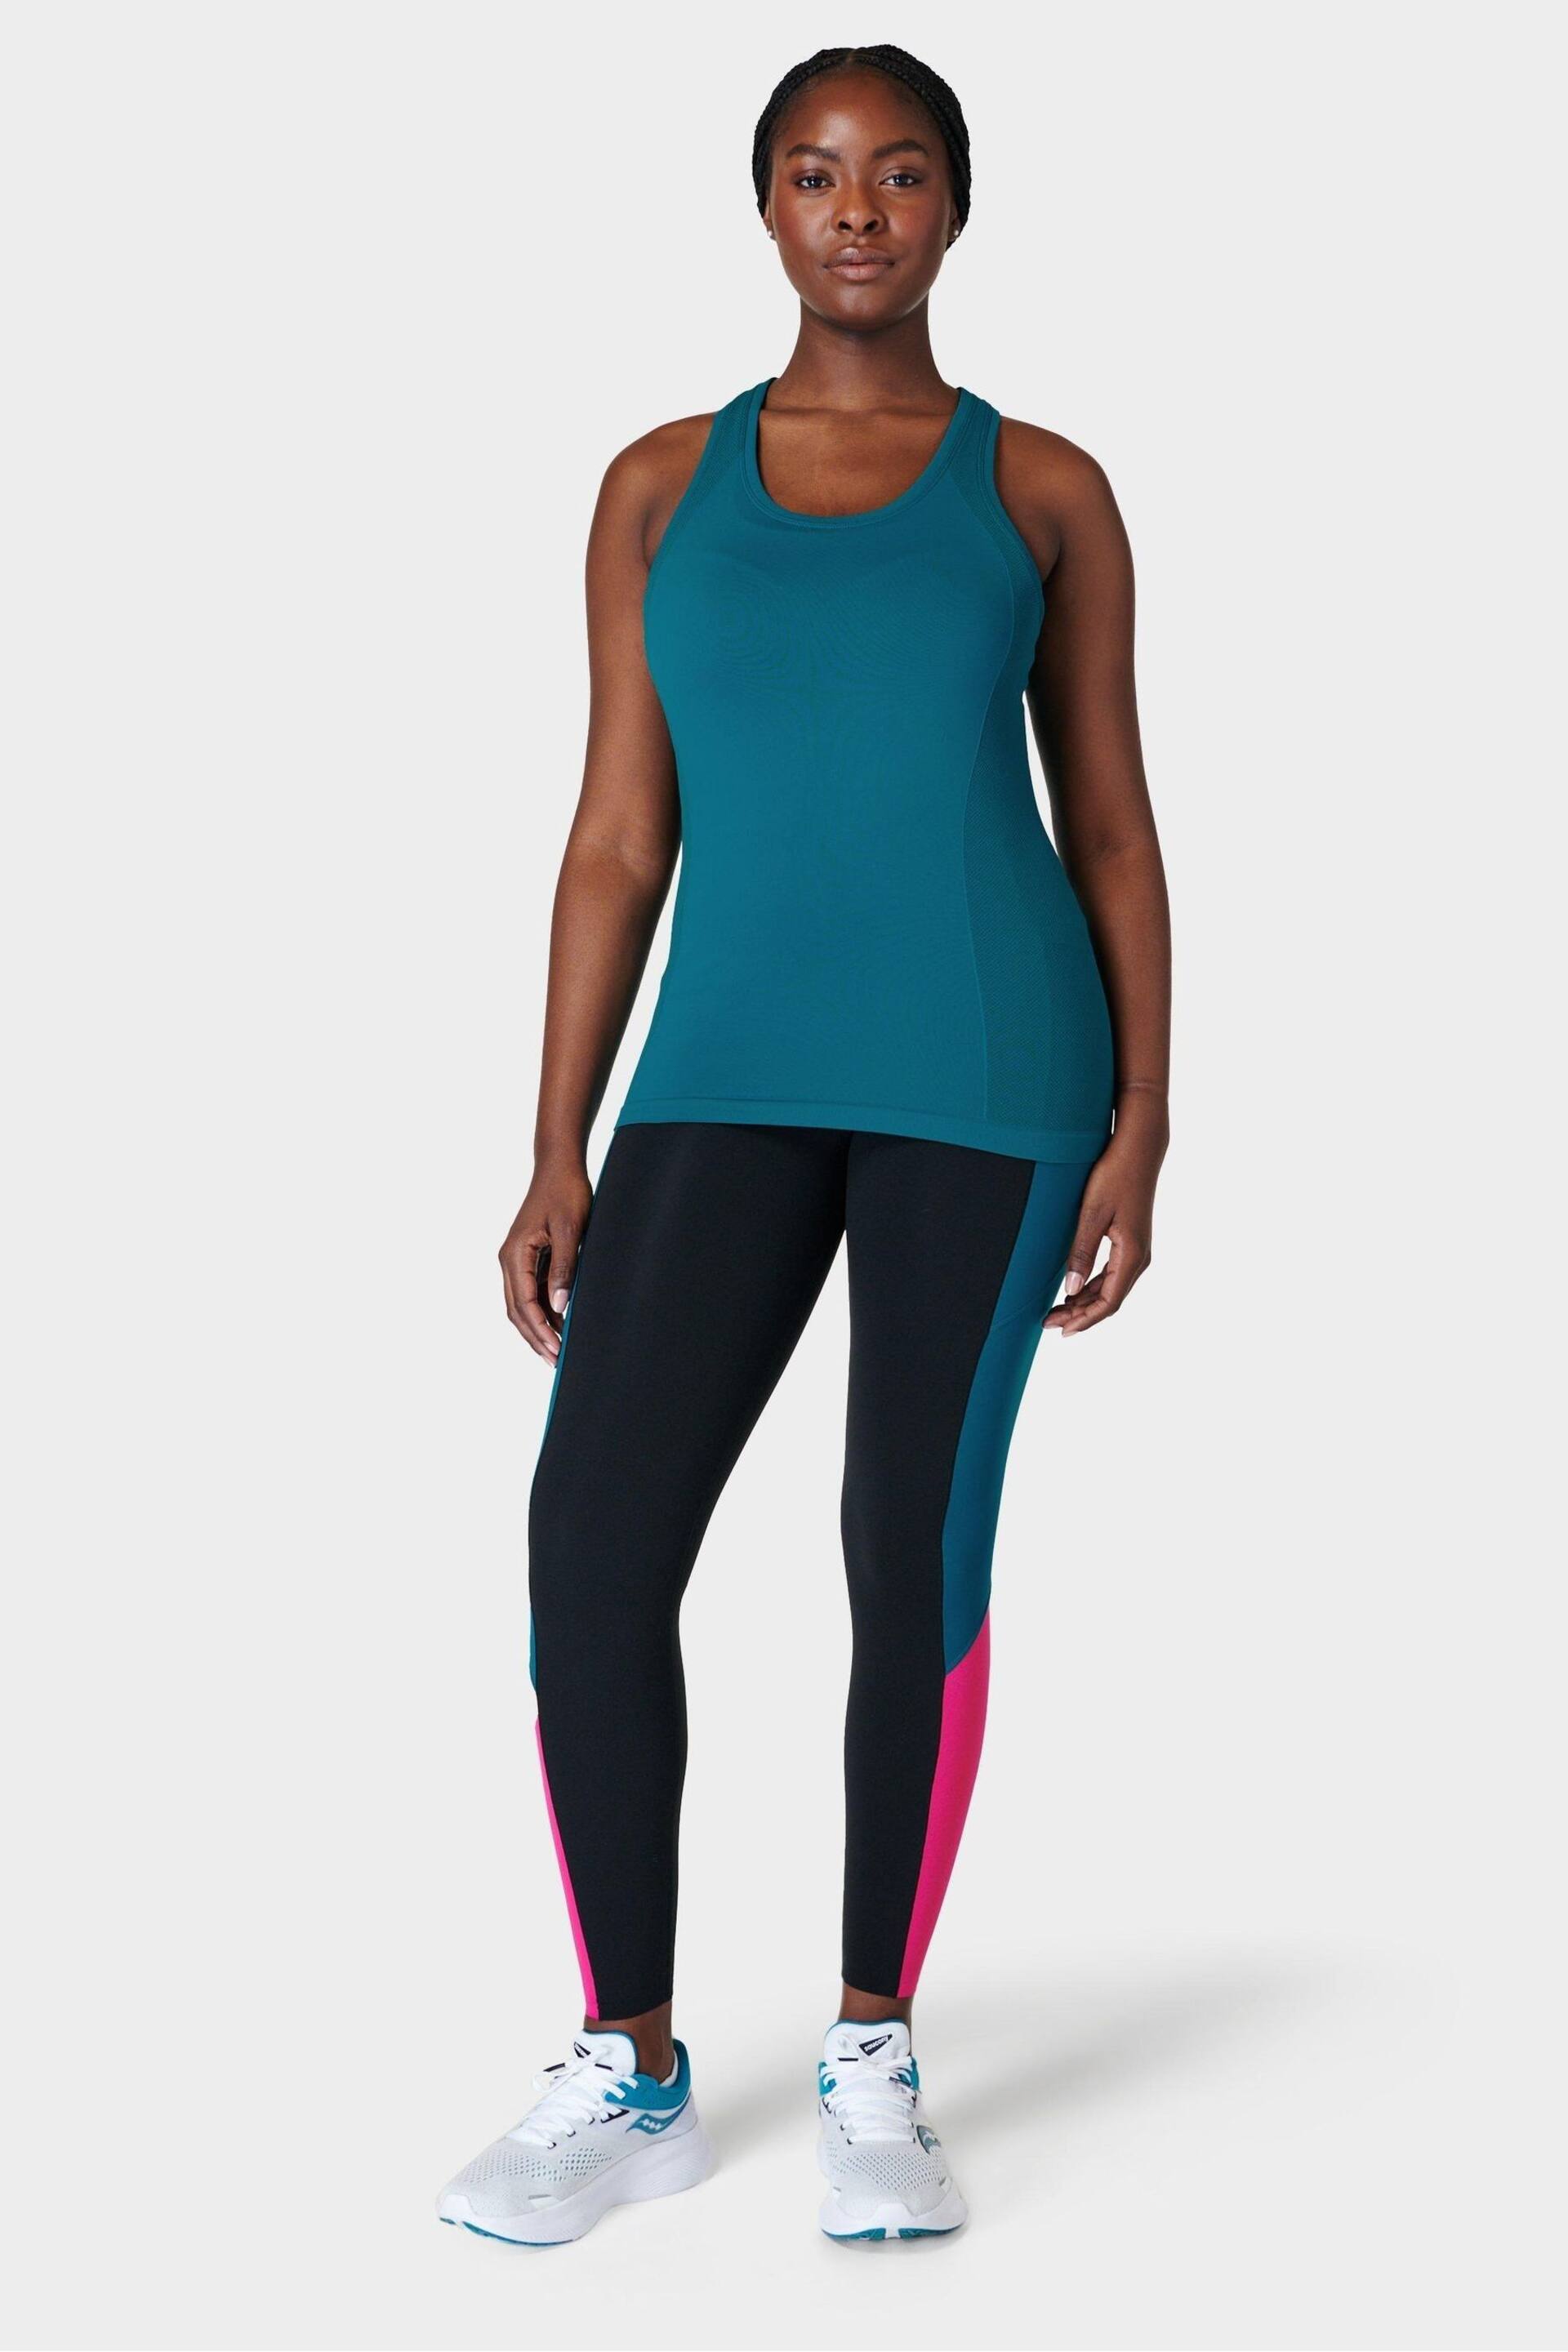 Sweaty Betty Reef Teal Blue Athlete Seamless Workout Tank Top - Image 5 of 7